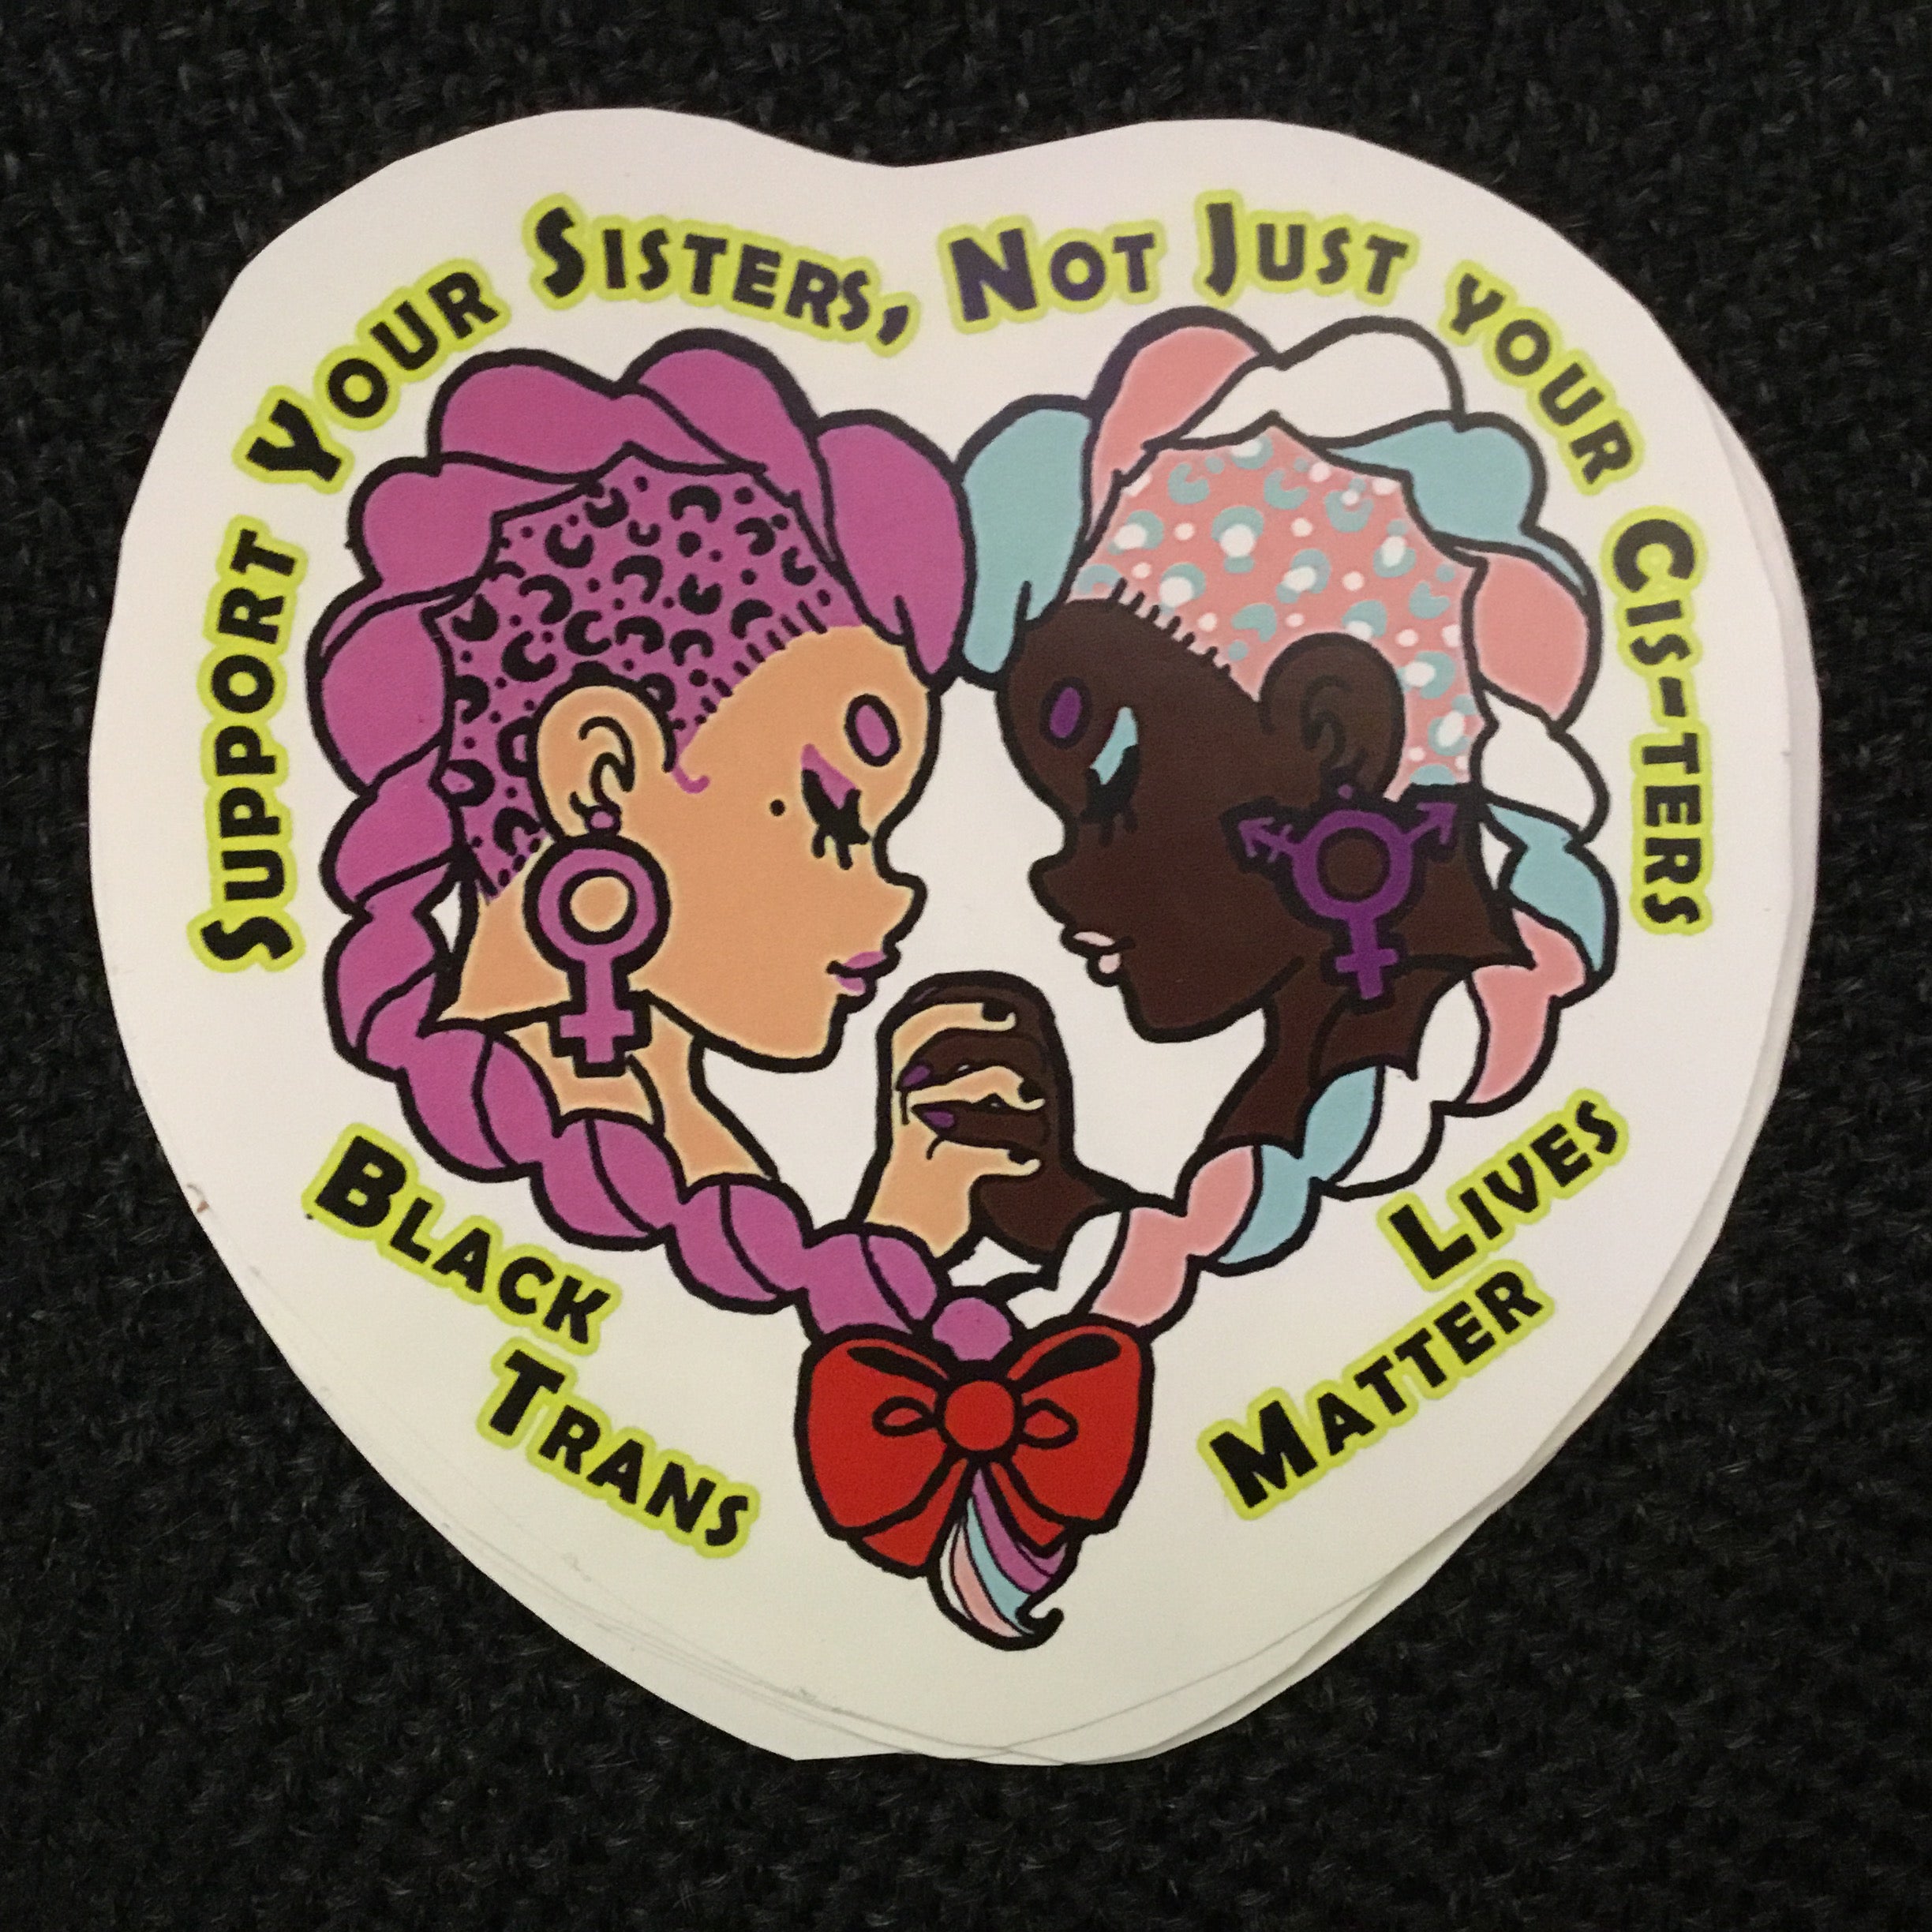 Support Your Sisters...Black Trans Lives Matter STICKER by Riot NJ